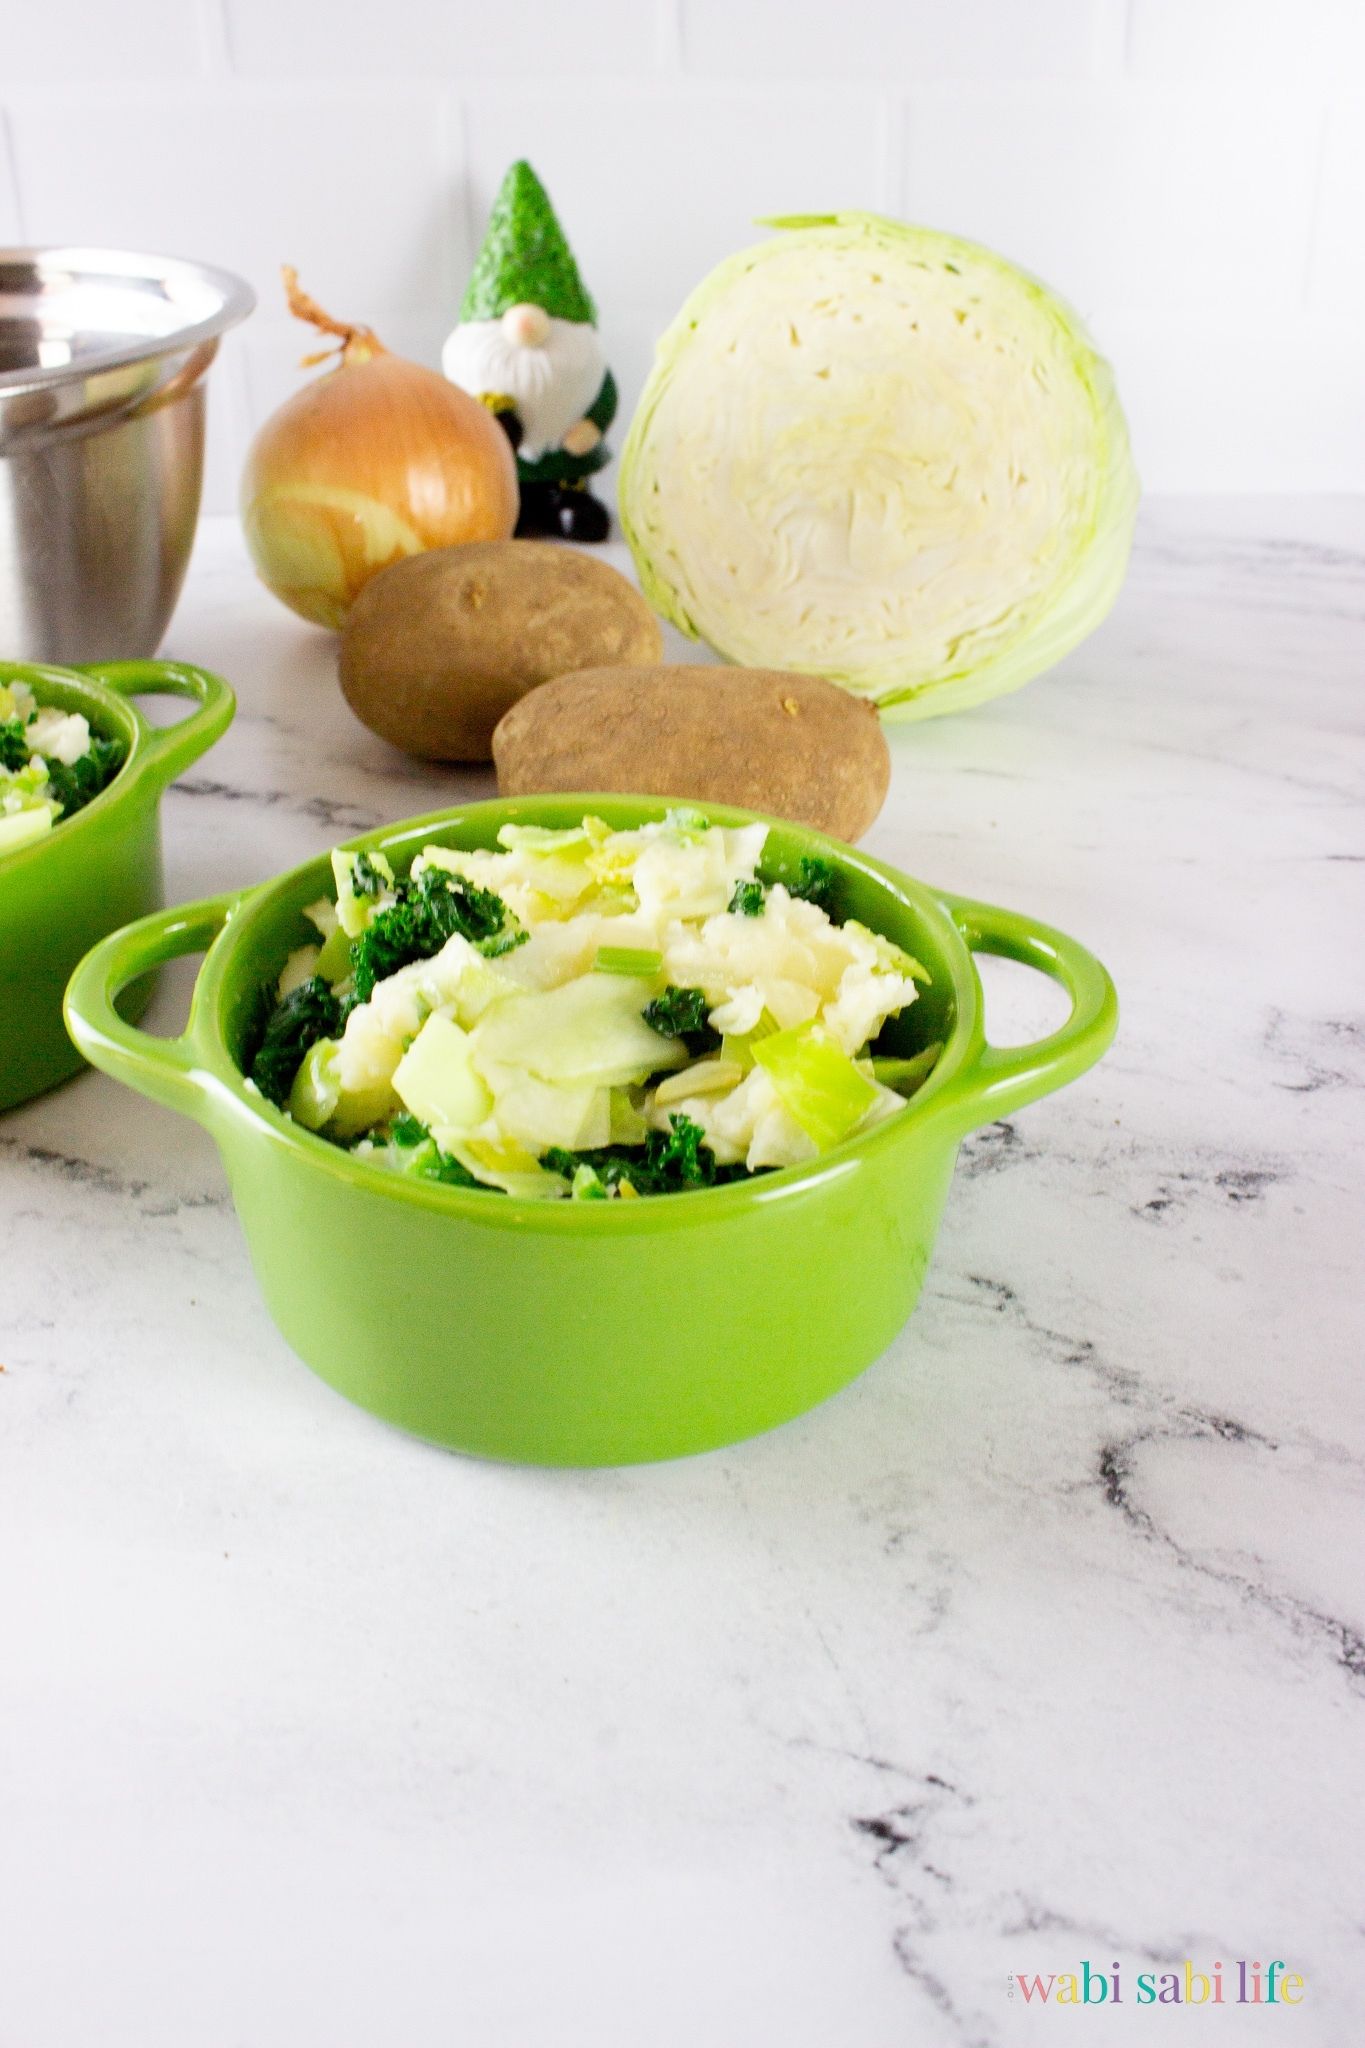 A green pot of Irish Colcannon potatoes with kale, leeks, and cabbage